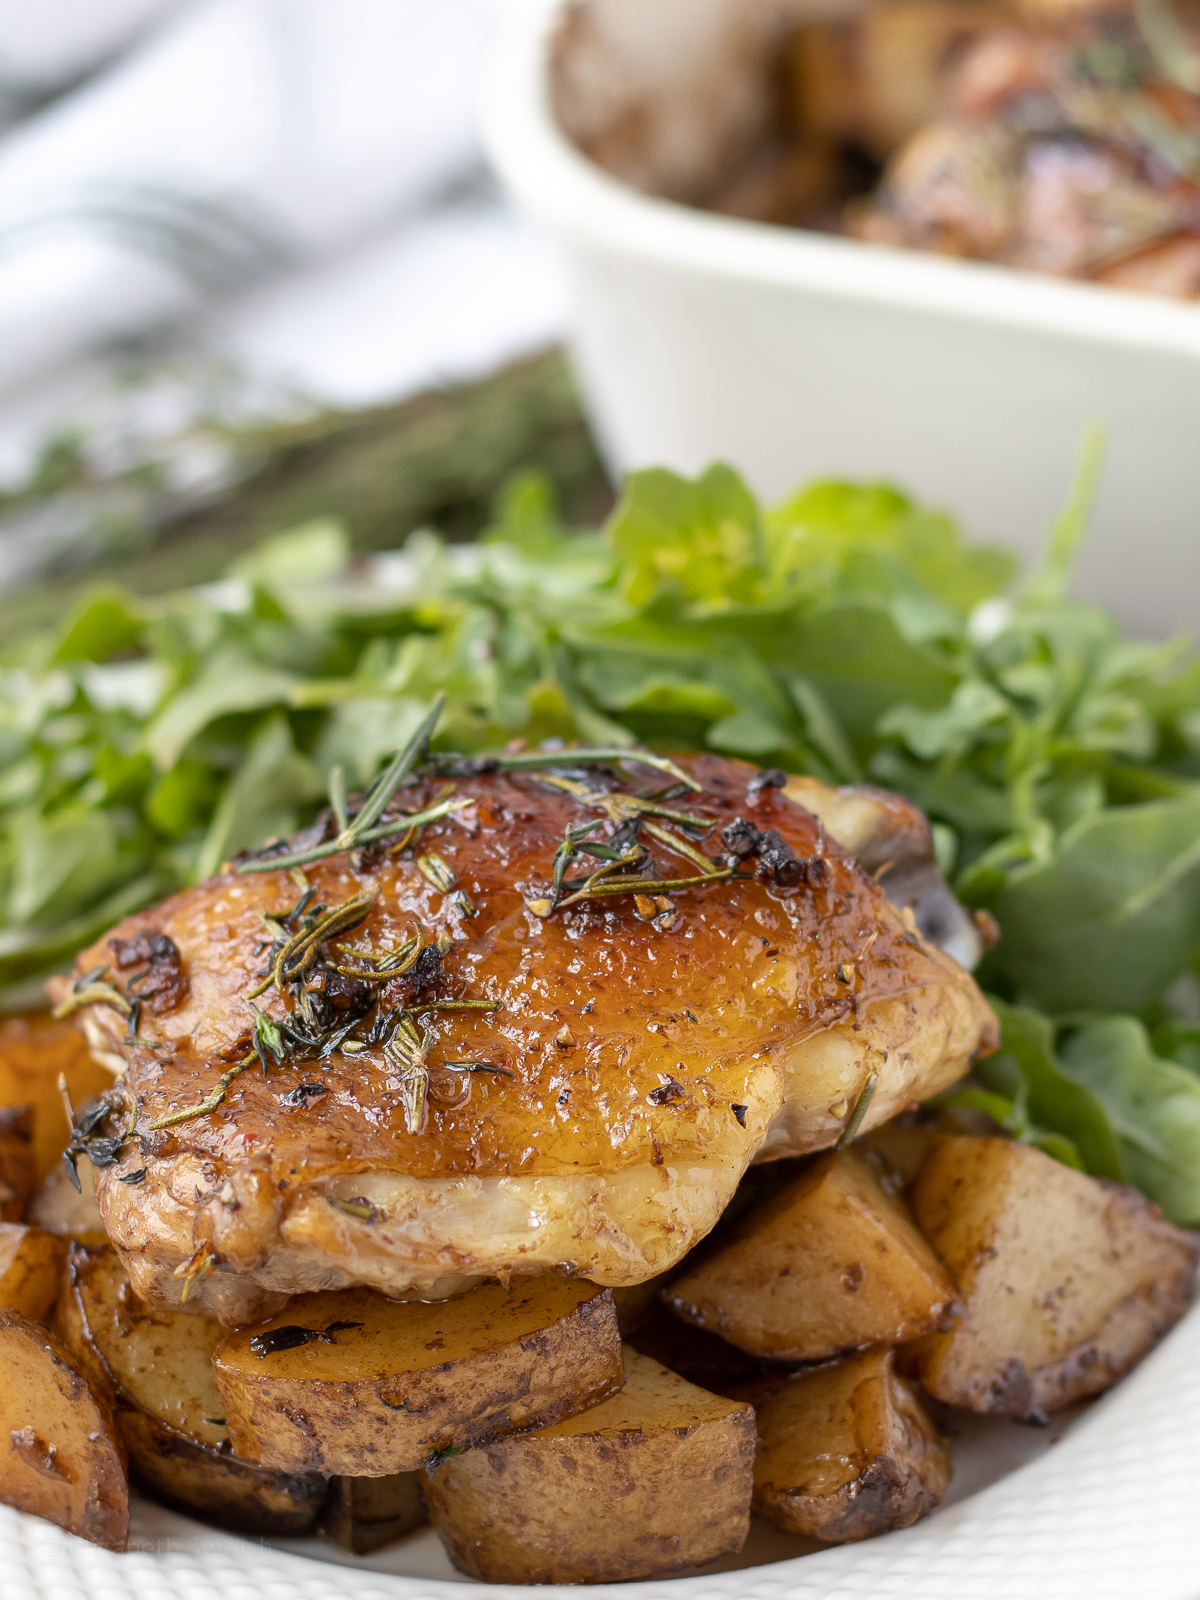 Rosemary Thyme Chicken Thighs with roasted potatoes and a side salad.